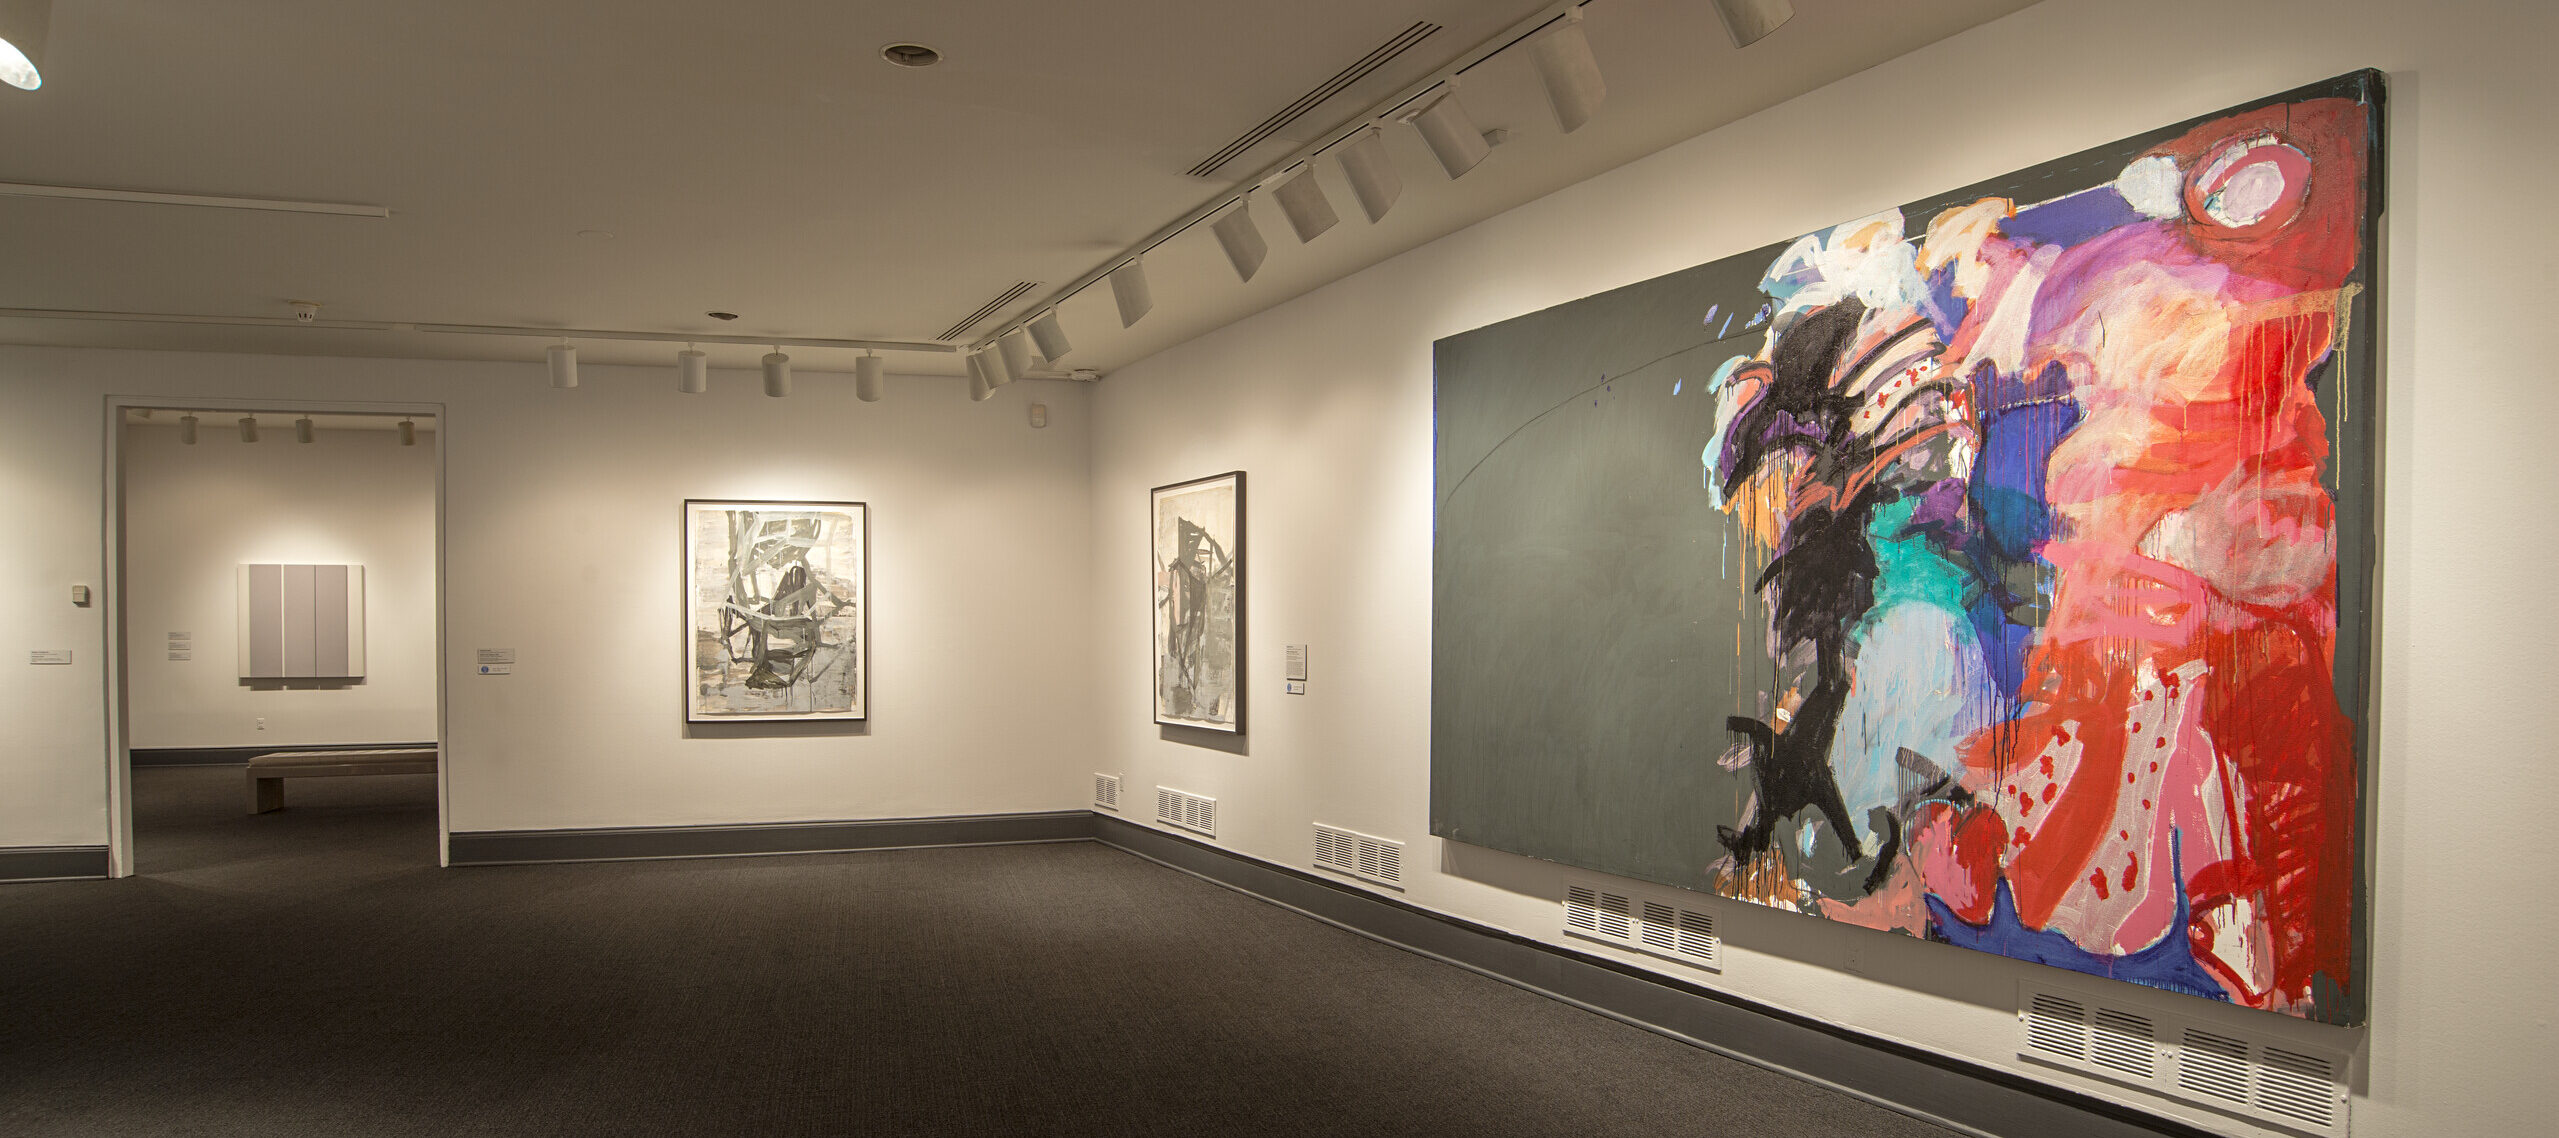 A view of a gallery with white walls and a gray floor. A large canvas with colorful brushstrokes takes up almost the entire wall. On a gray background, brushstrokes in pink, red, blue, and brown take up half of the canvas, while the other half remains gray.